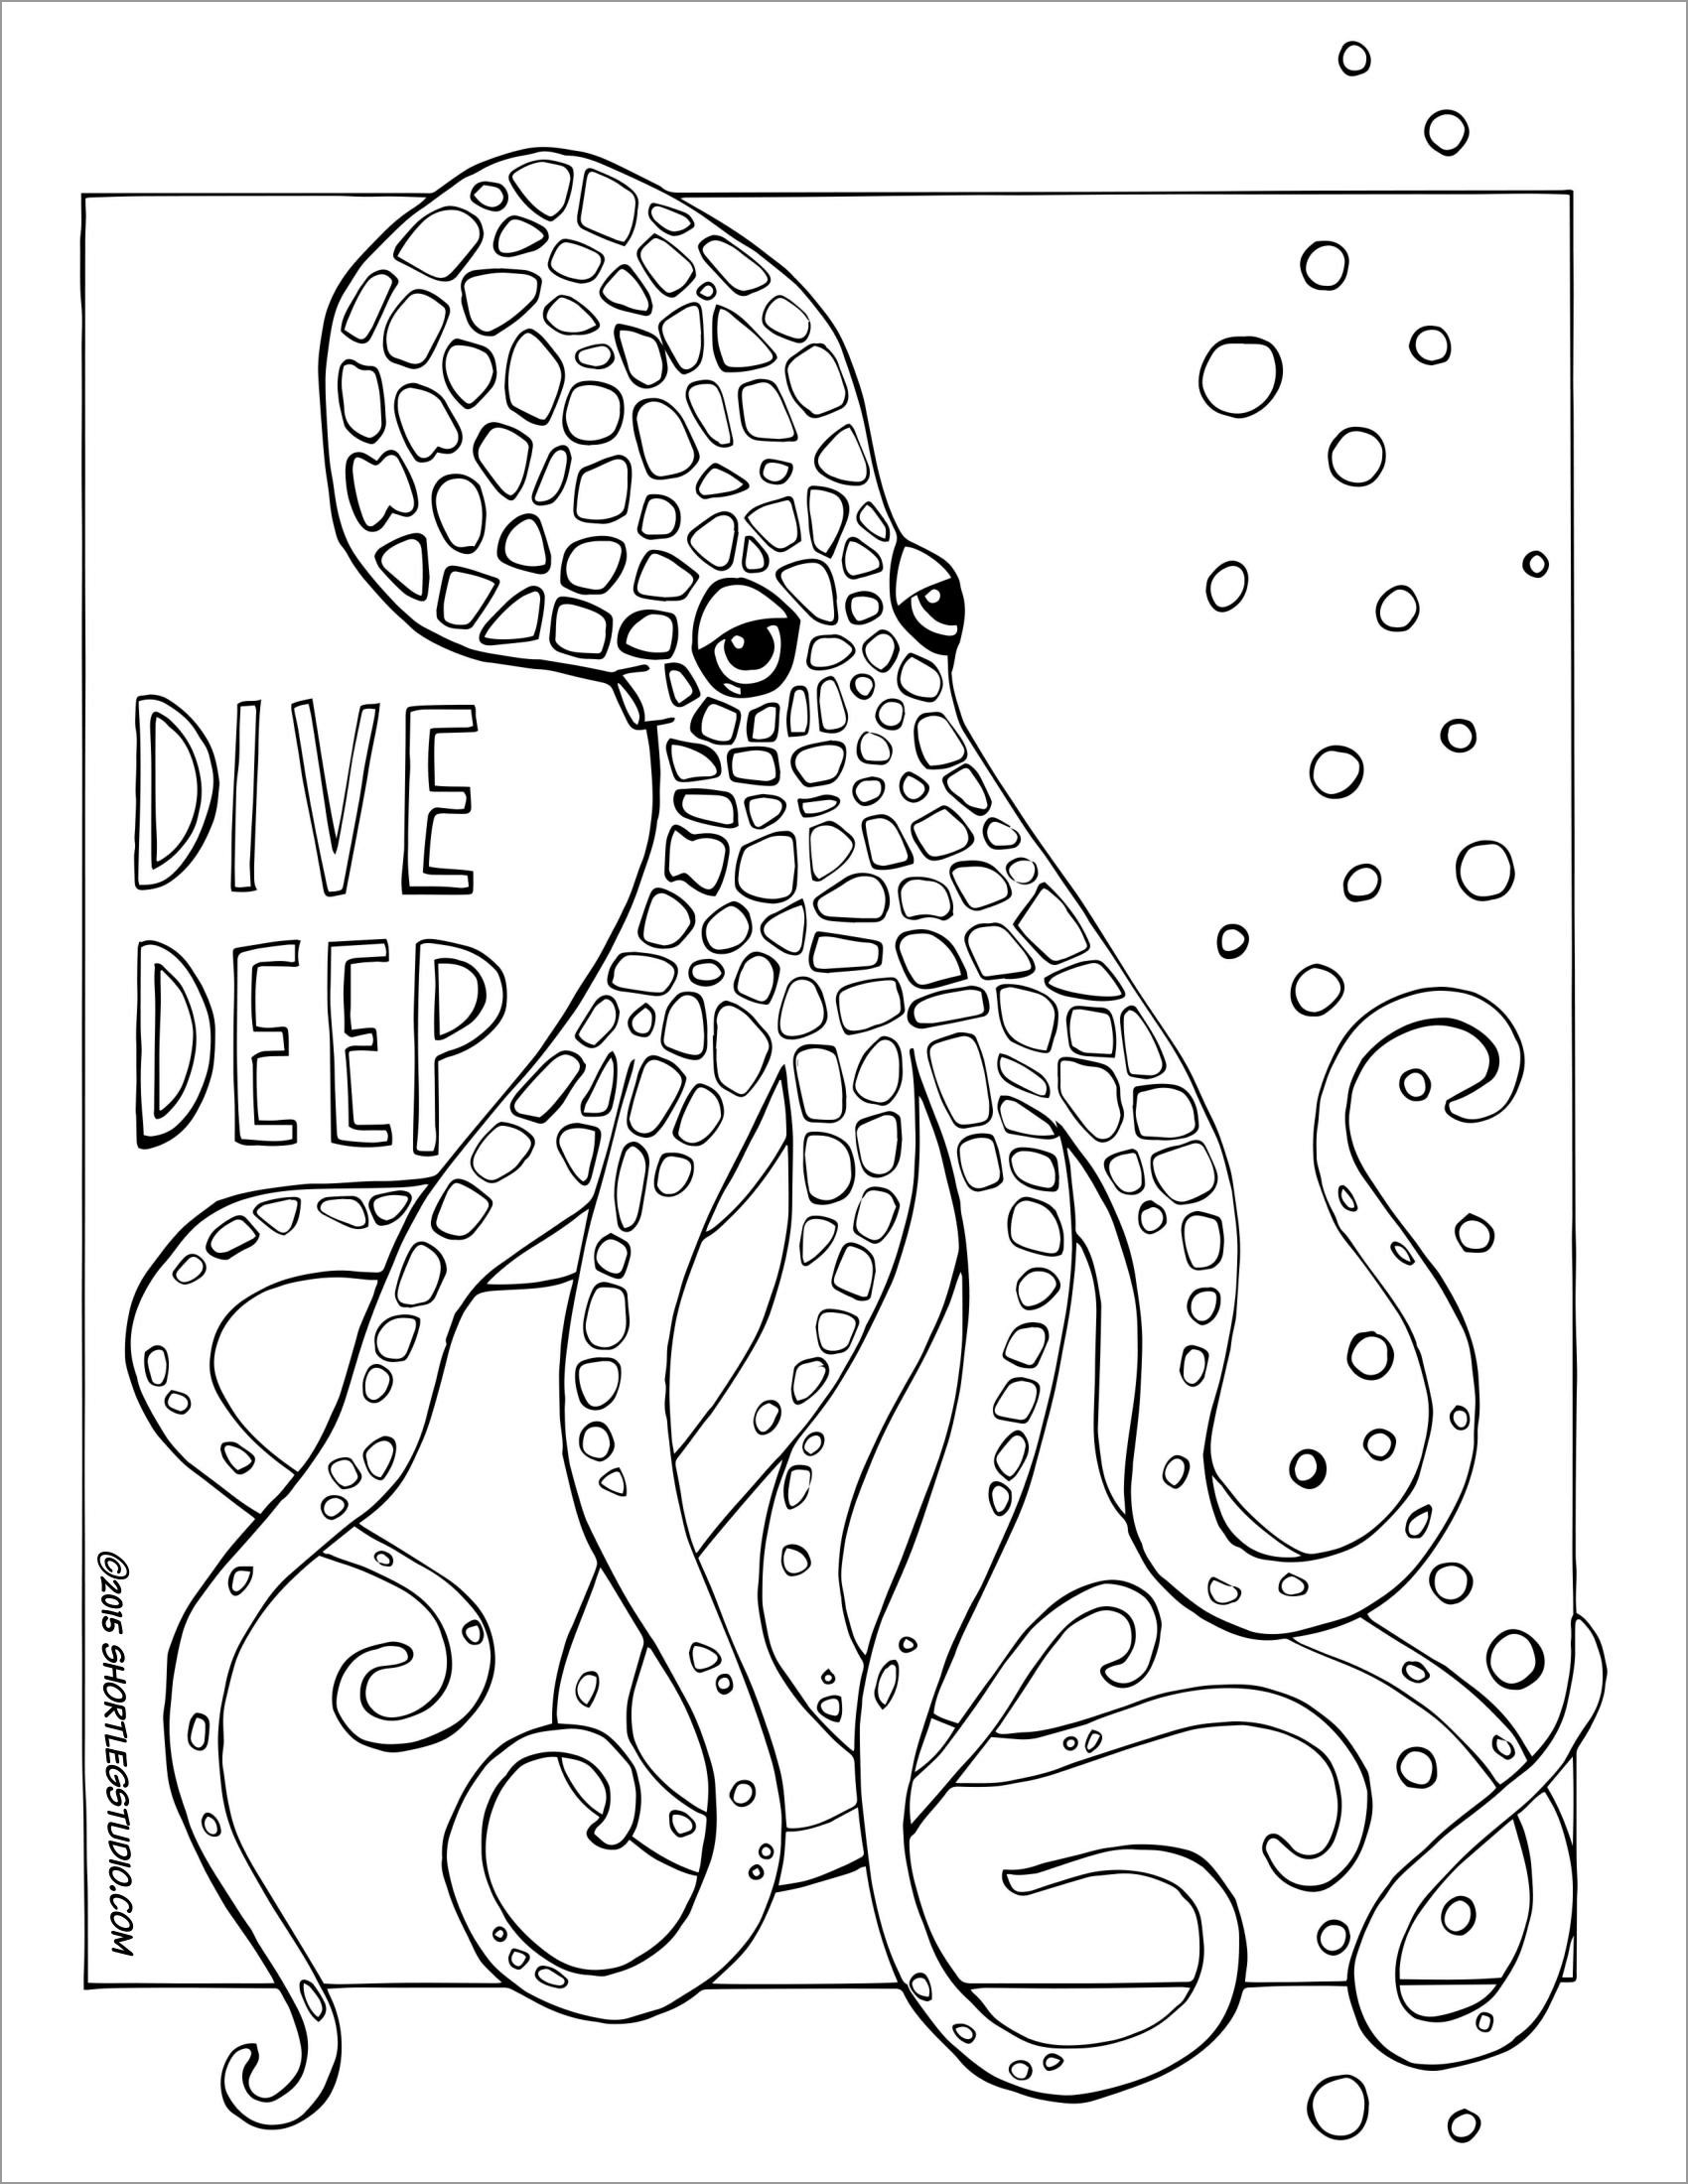 Coloring Page Of An Octopus